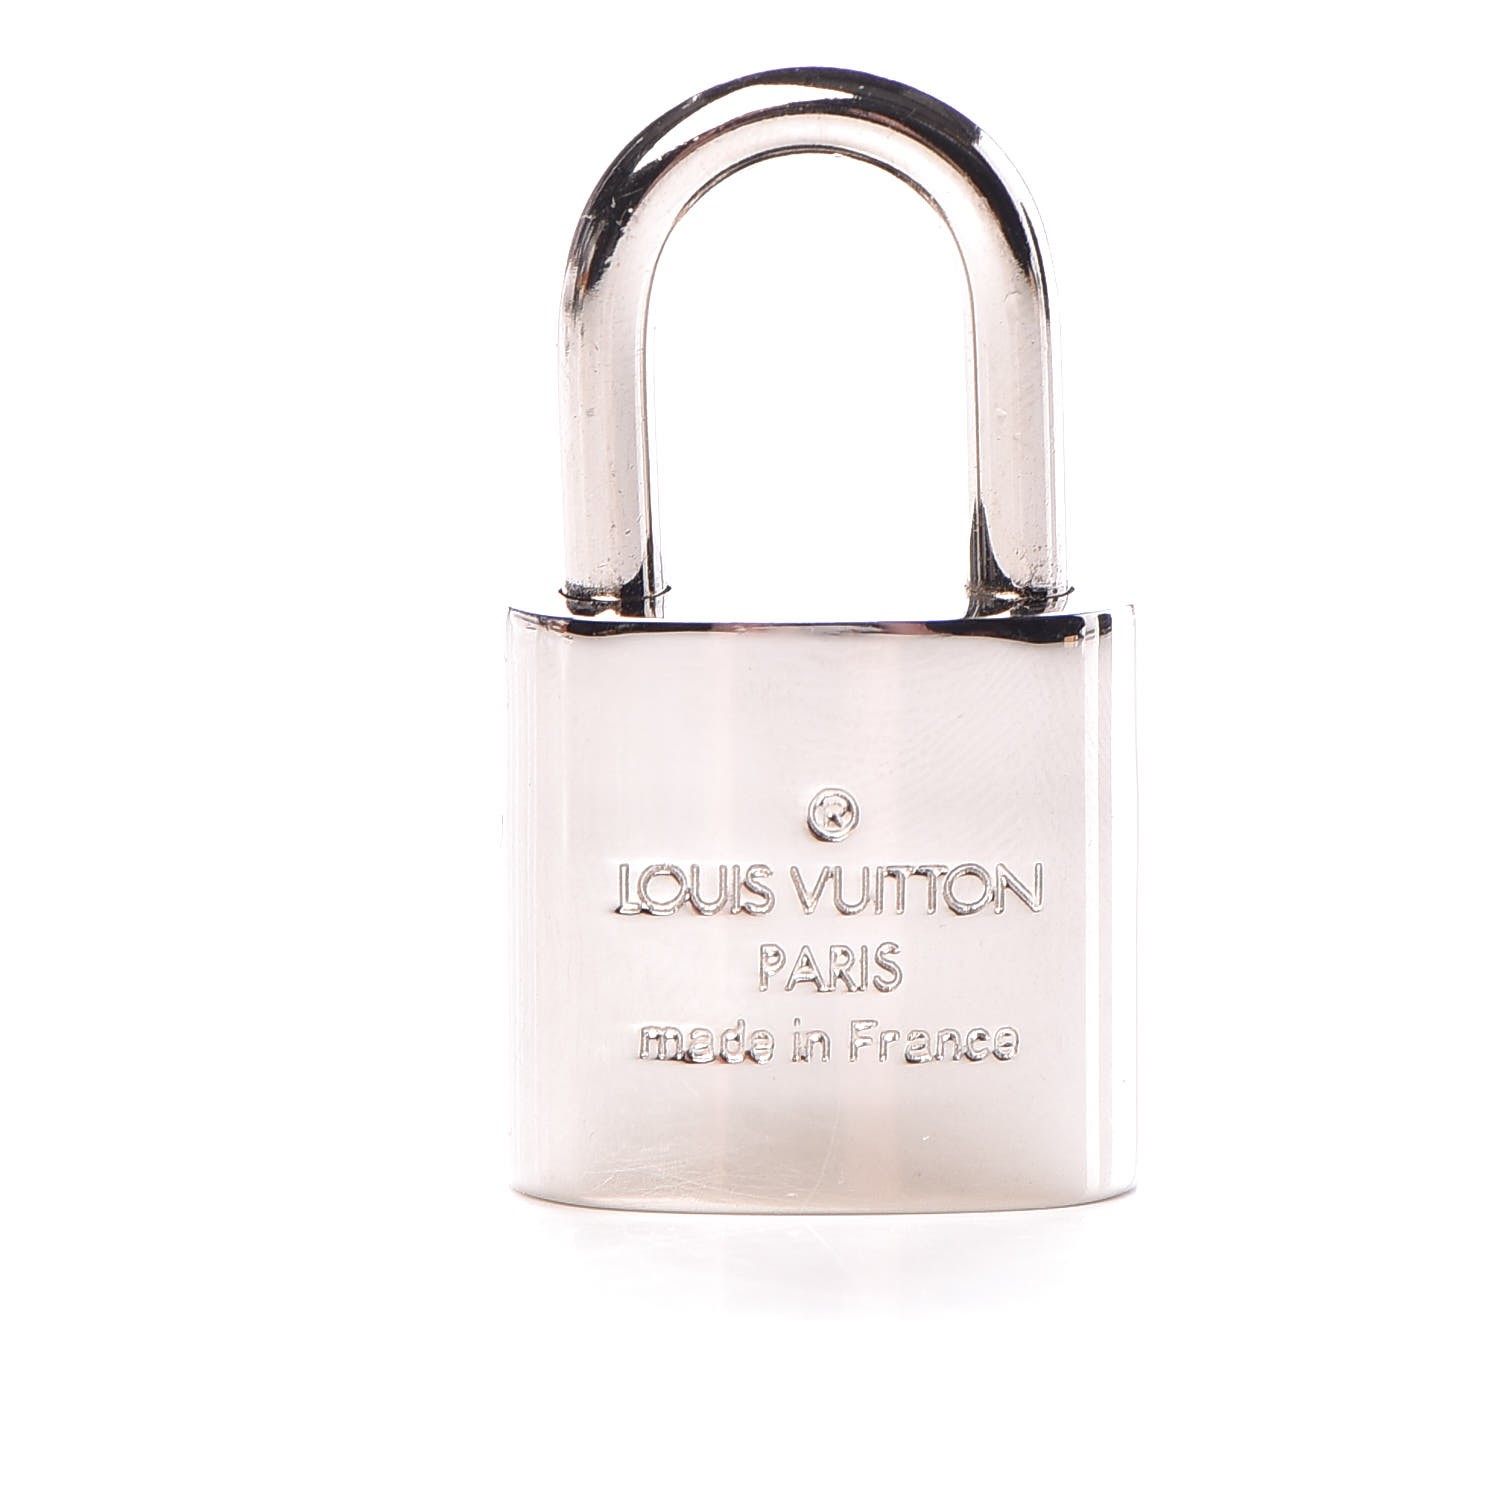 LOUIS VUITTON Polished Silver Lock and Key Set 309101